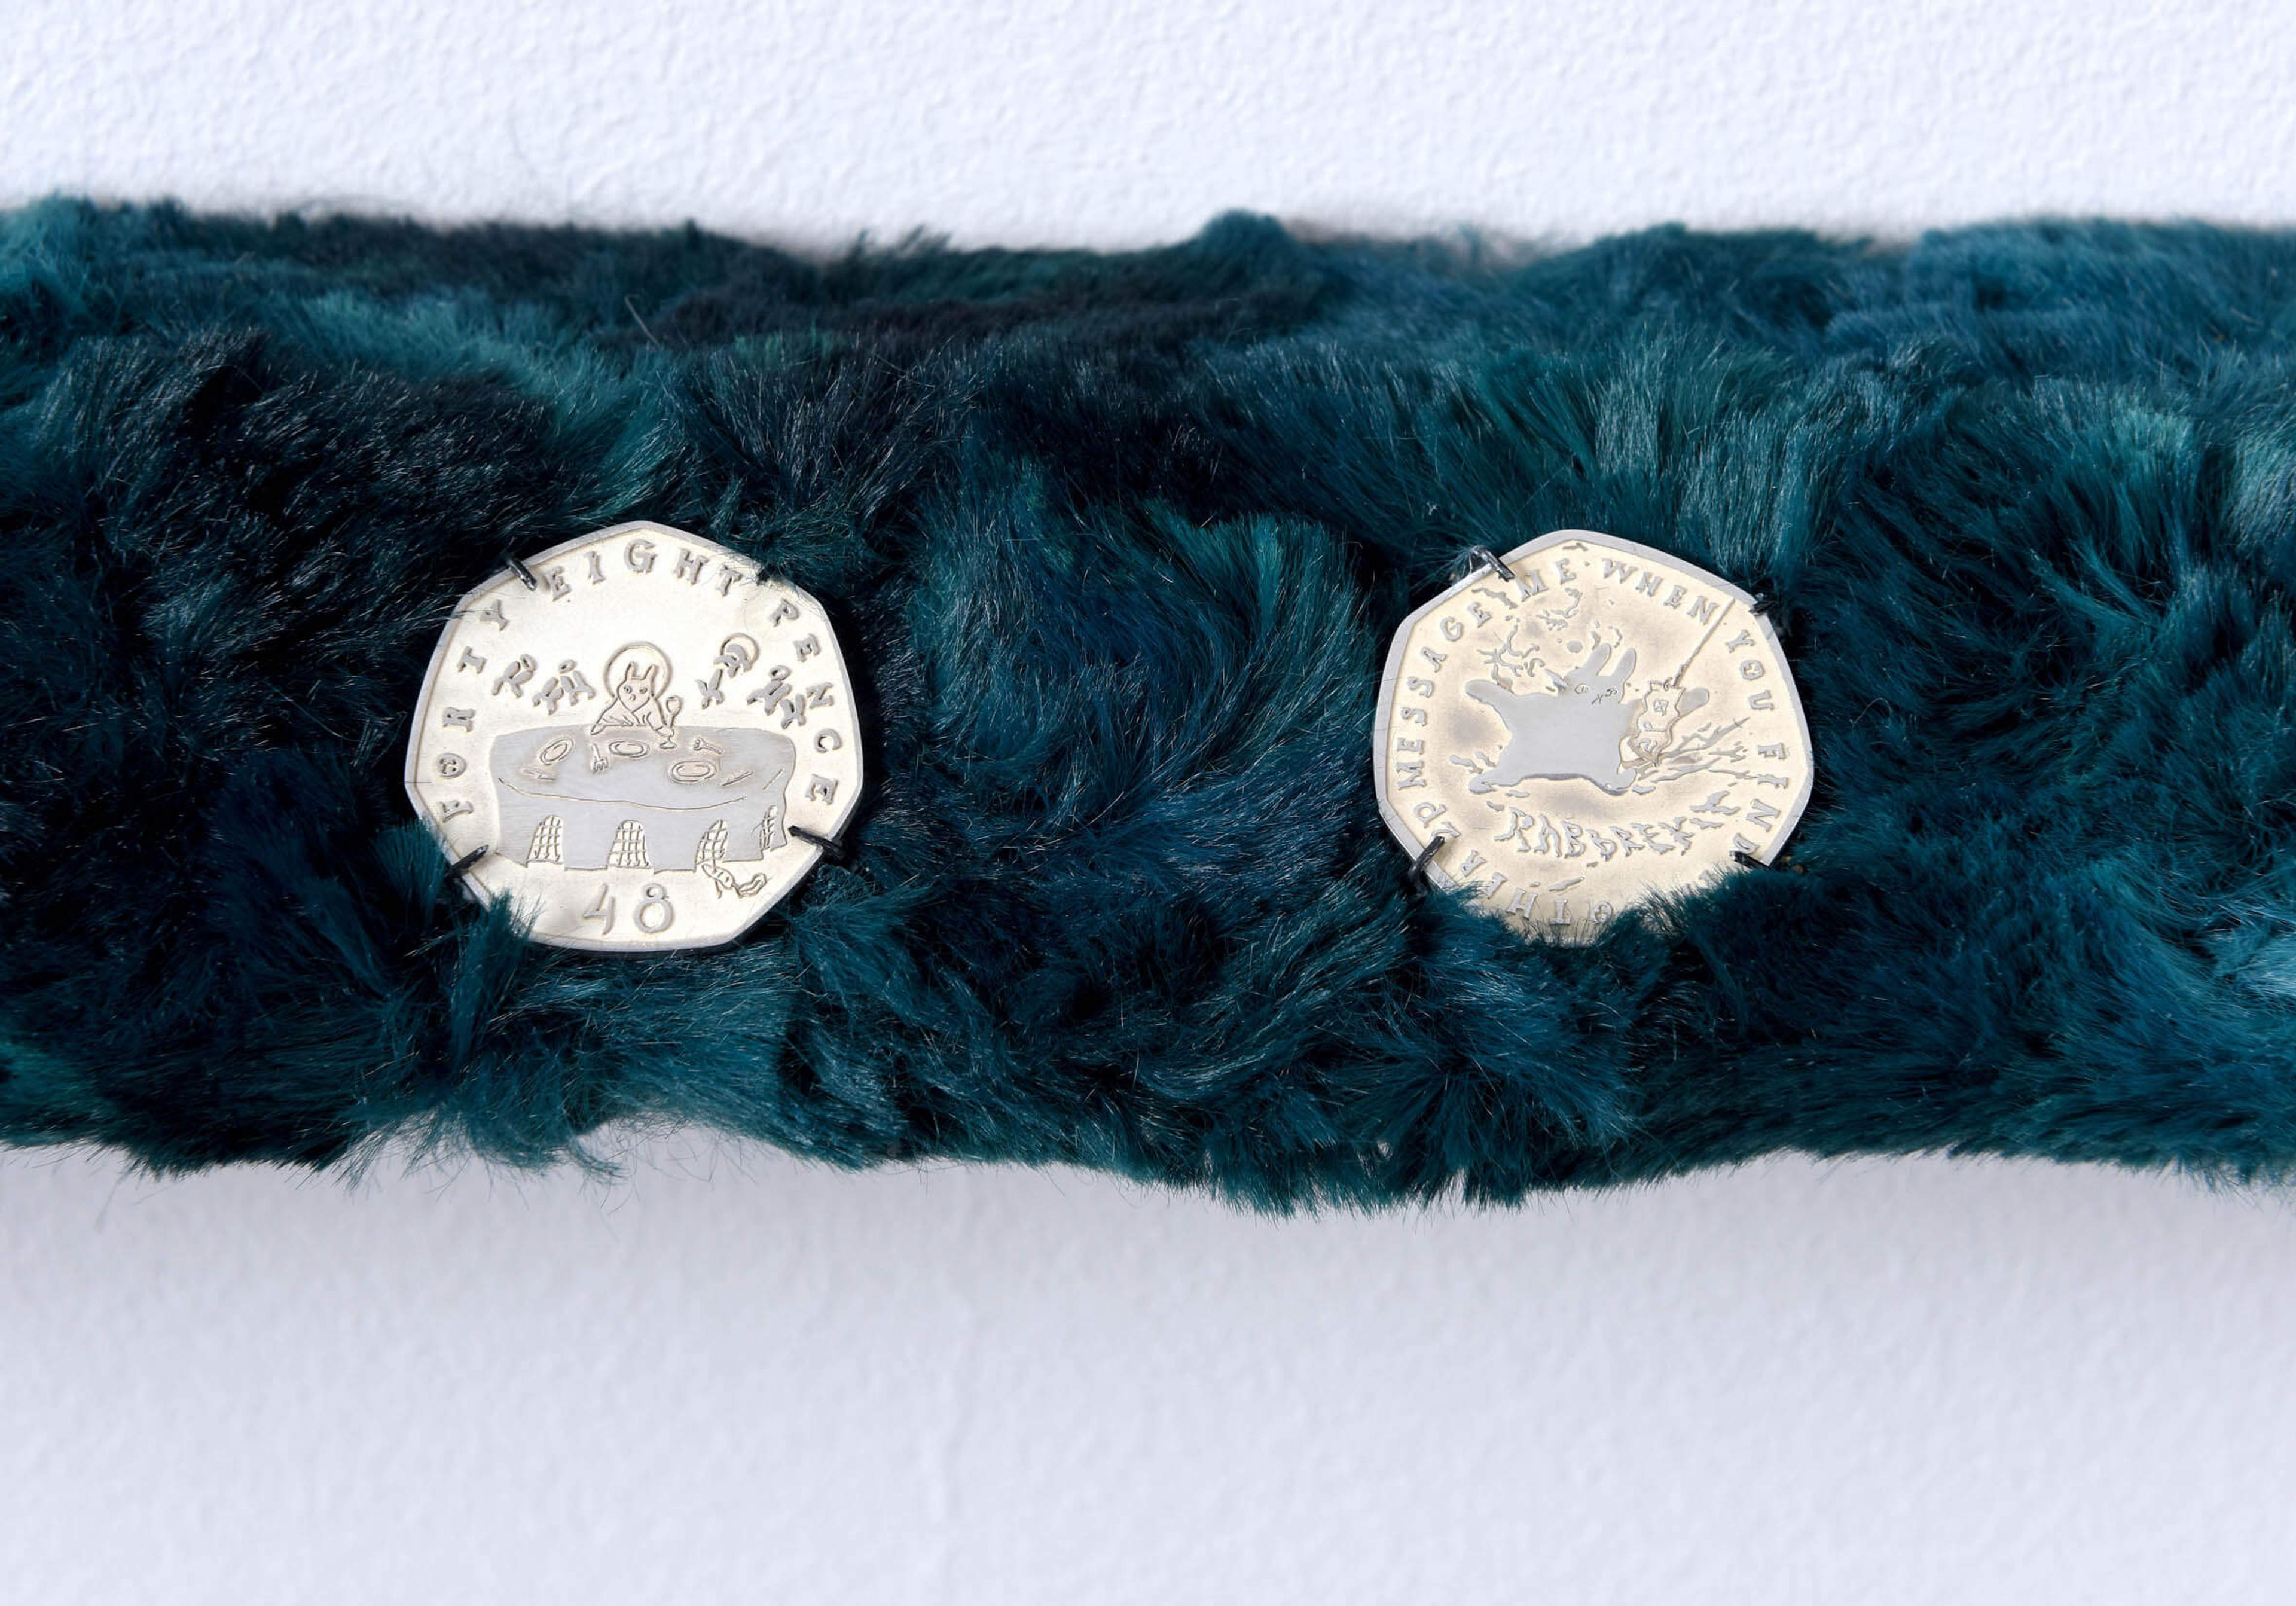 Engraved 48p coins commemorating Rabbrexit, displayed upon fluffy teal fabric